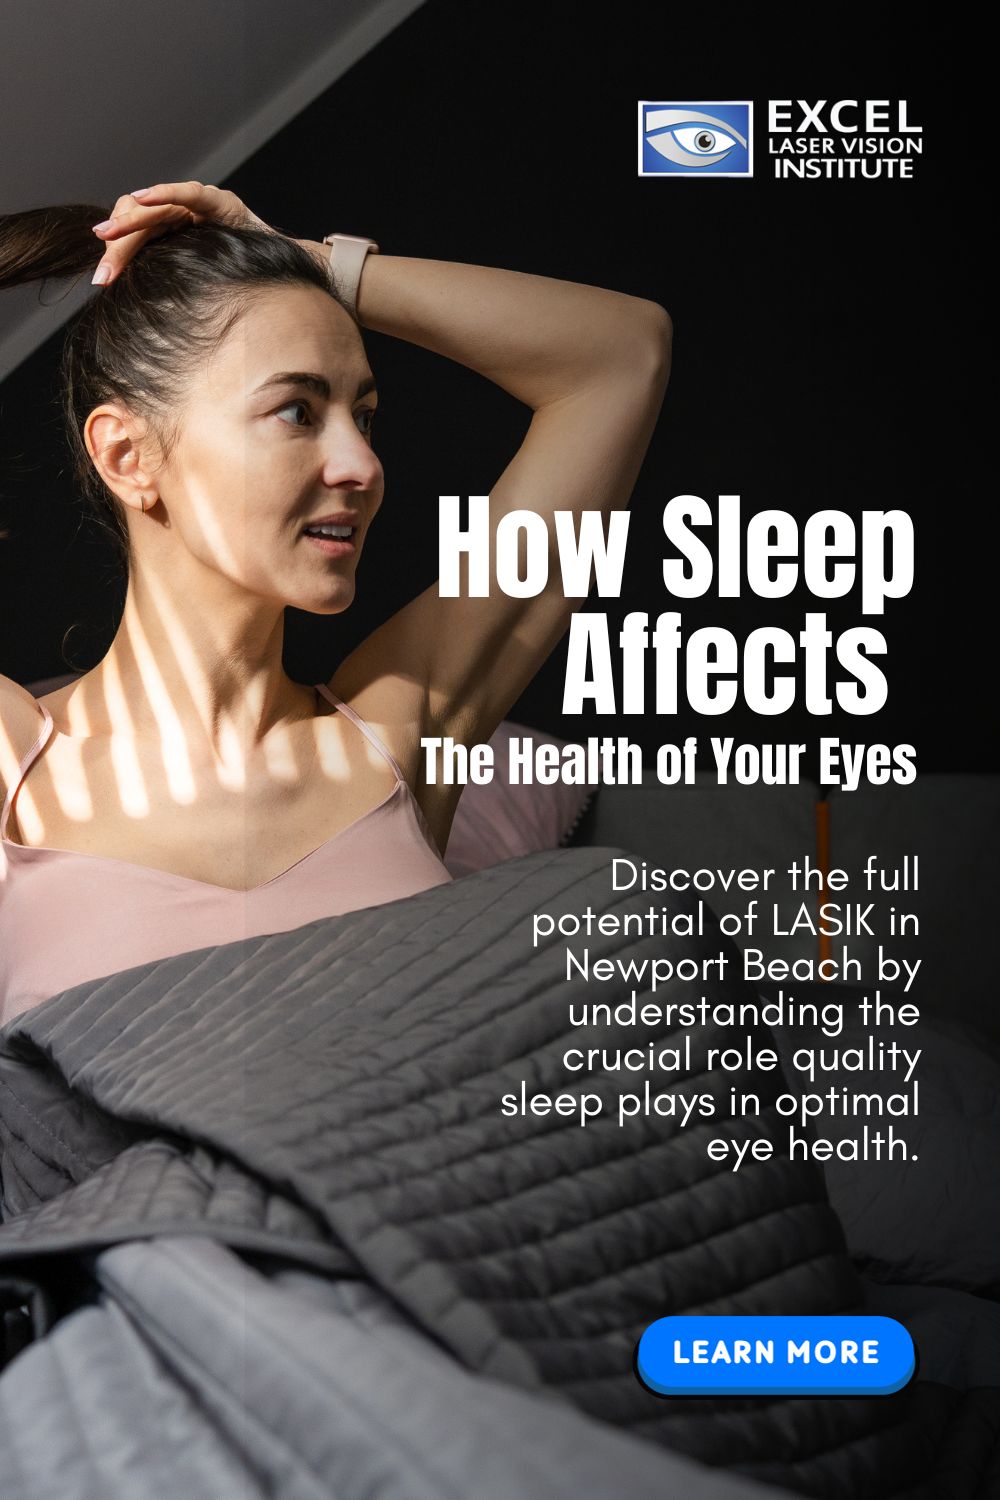 woman-just-woke-up-with-clear-vision-title-of-the-blog-on-the-side-How-Sleep-Affects-the-Health-of-Your-Eyes-Pinterest-Pin